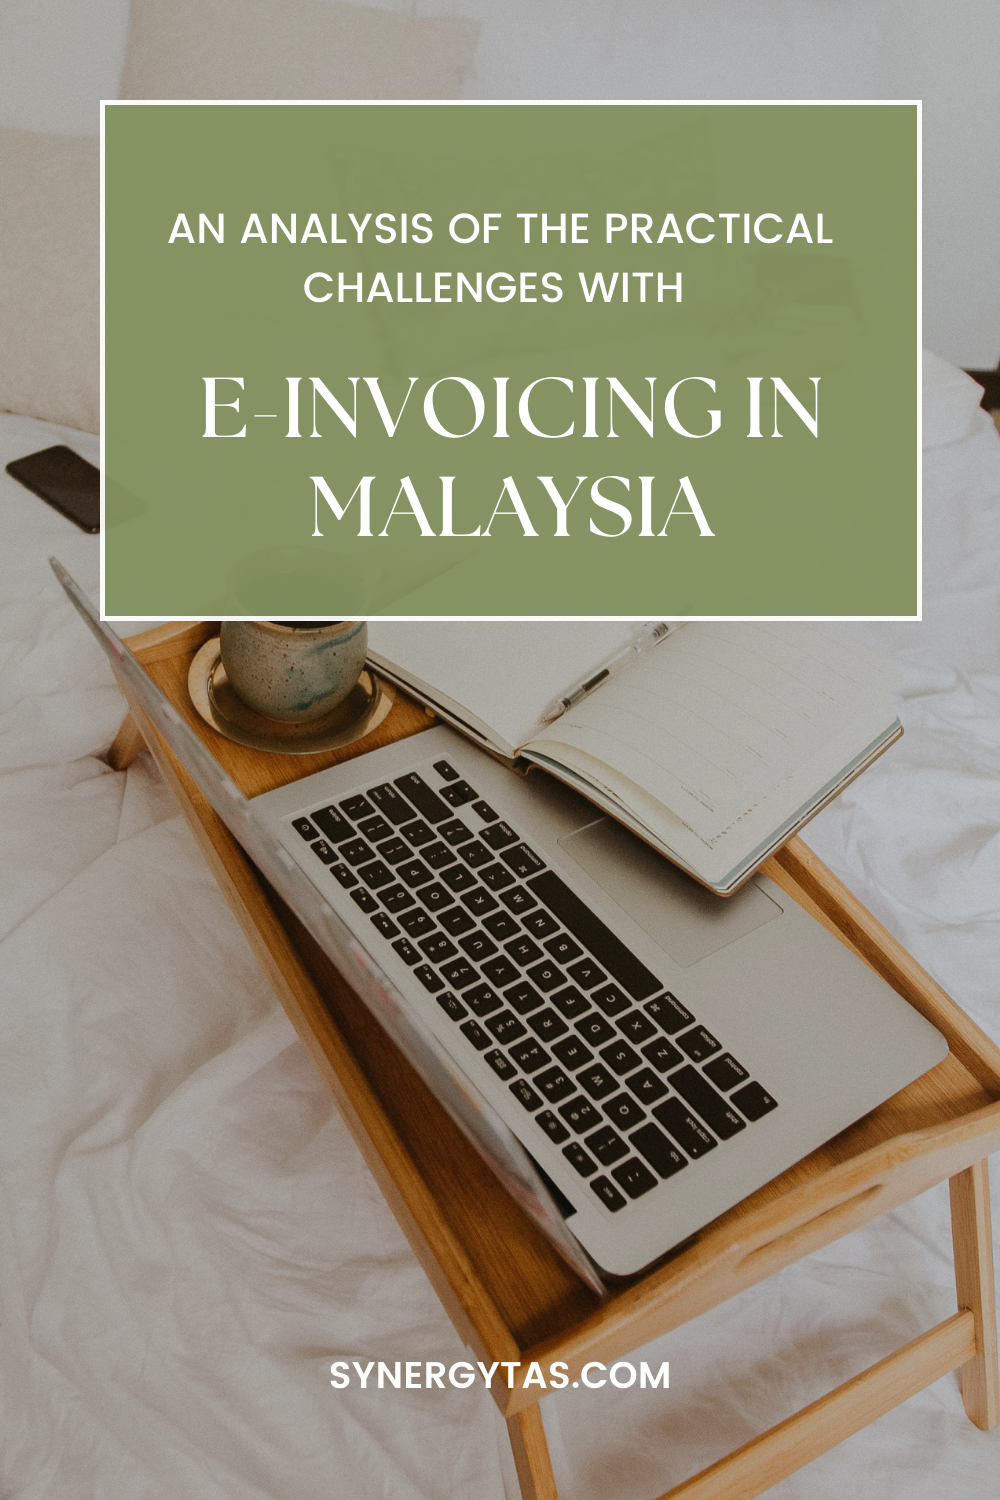 AN ANALYSIS OF THE PRACTICAL CHALLENGES WITH e-invoicing